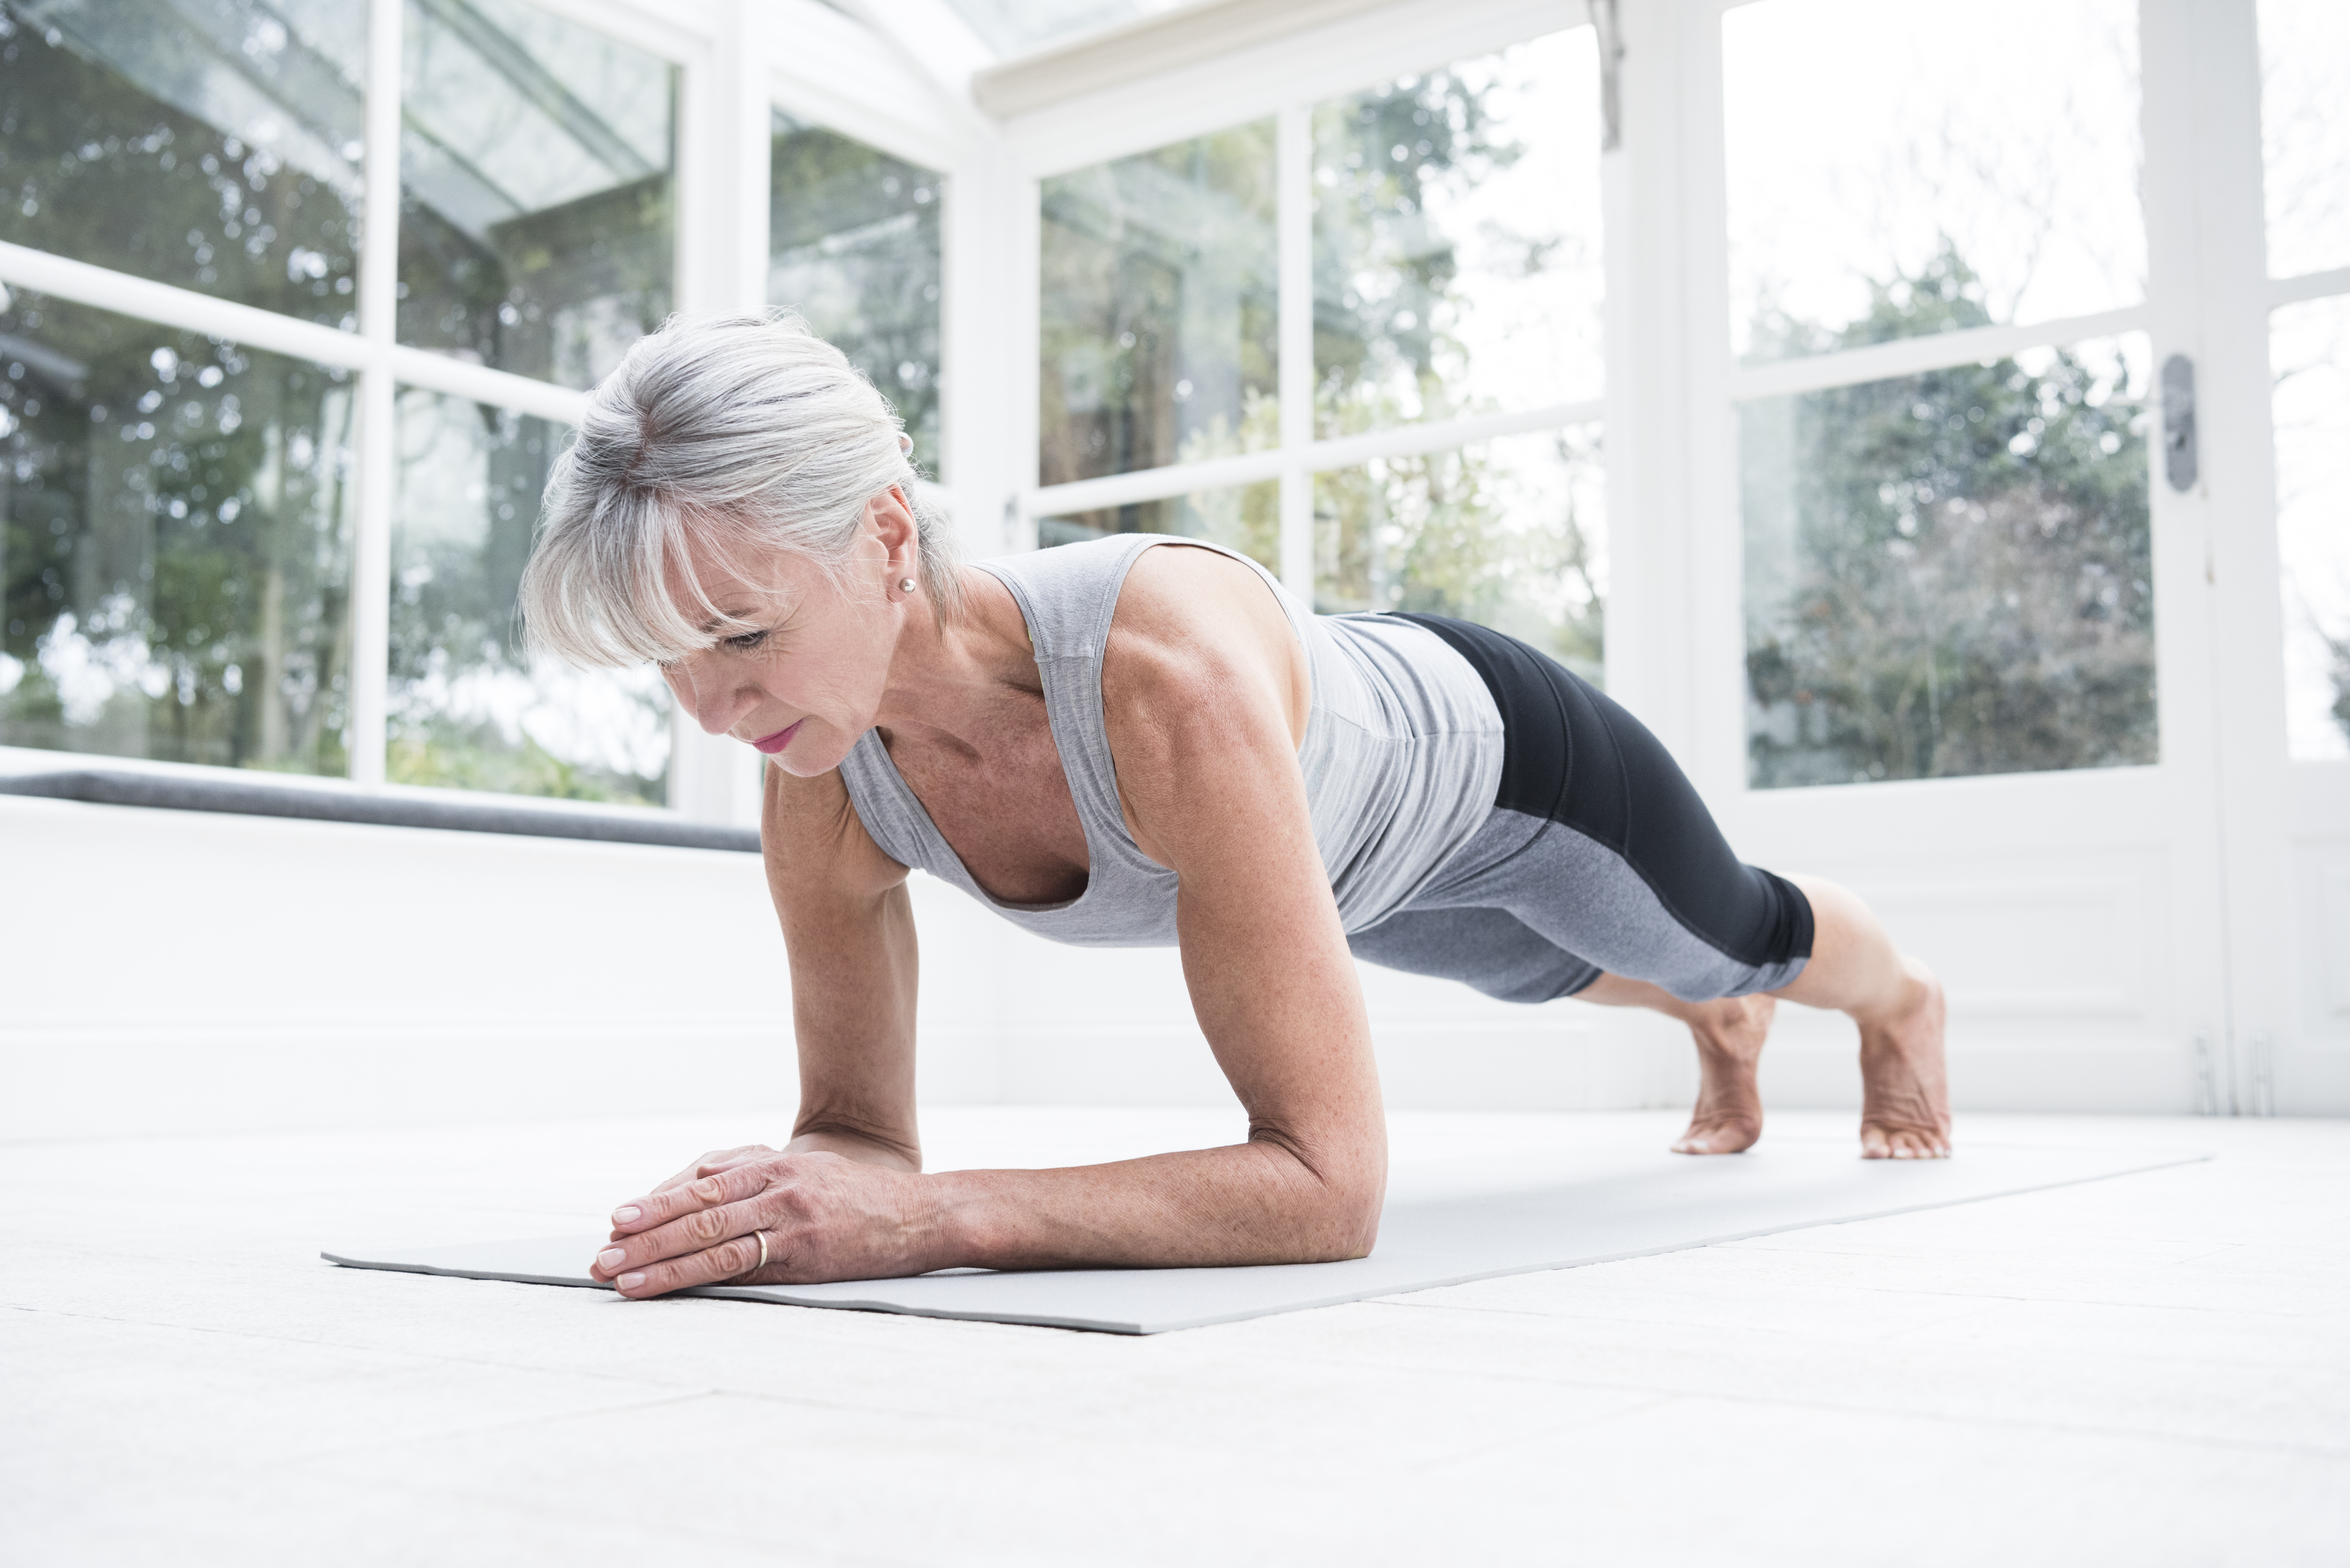 Exercise Plan for a 50-Year-Old Woman